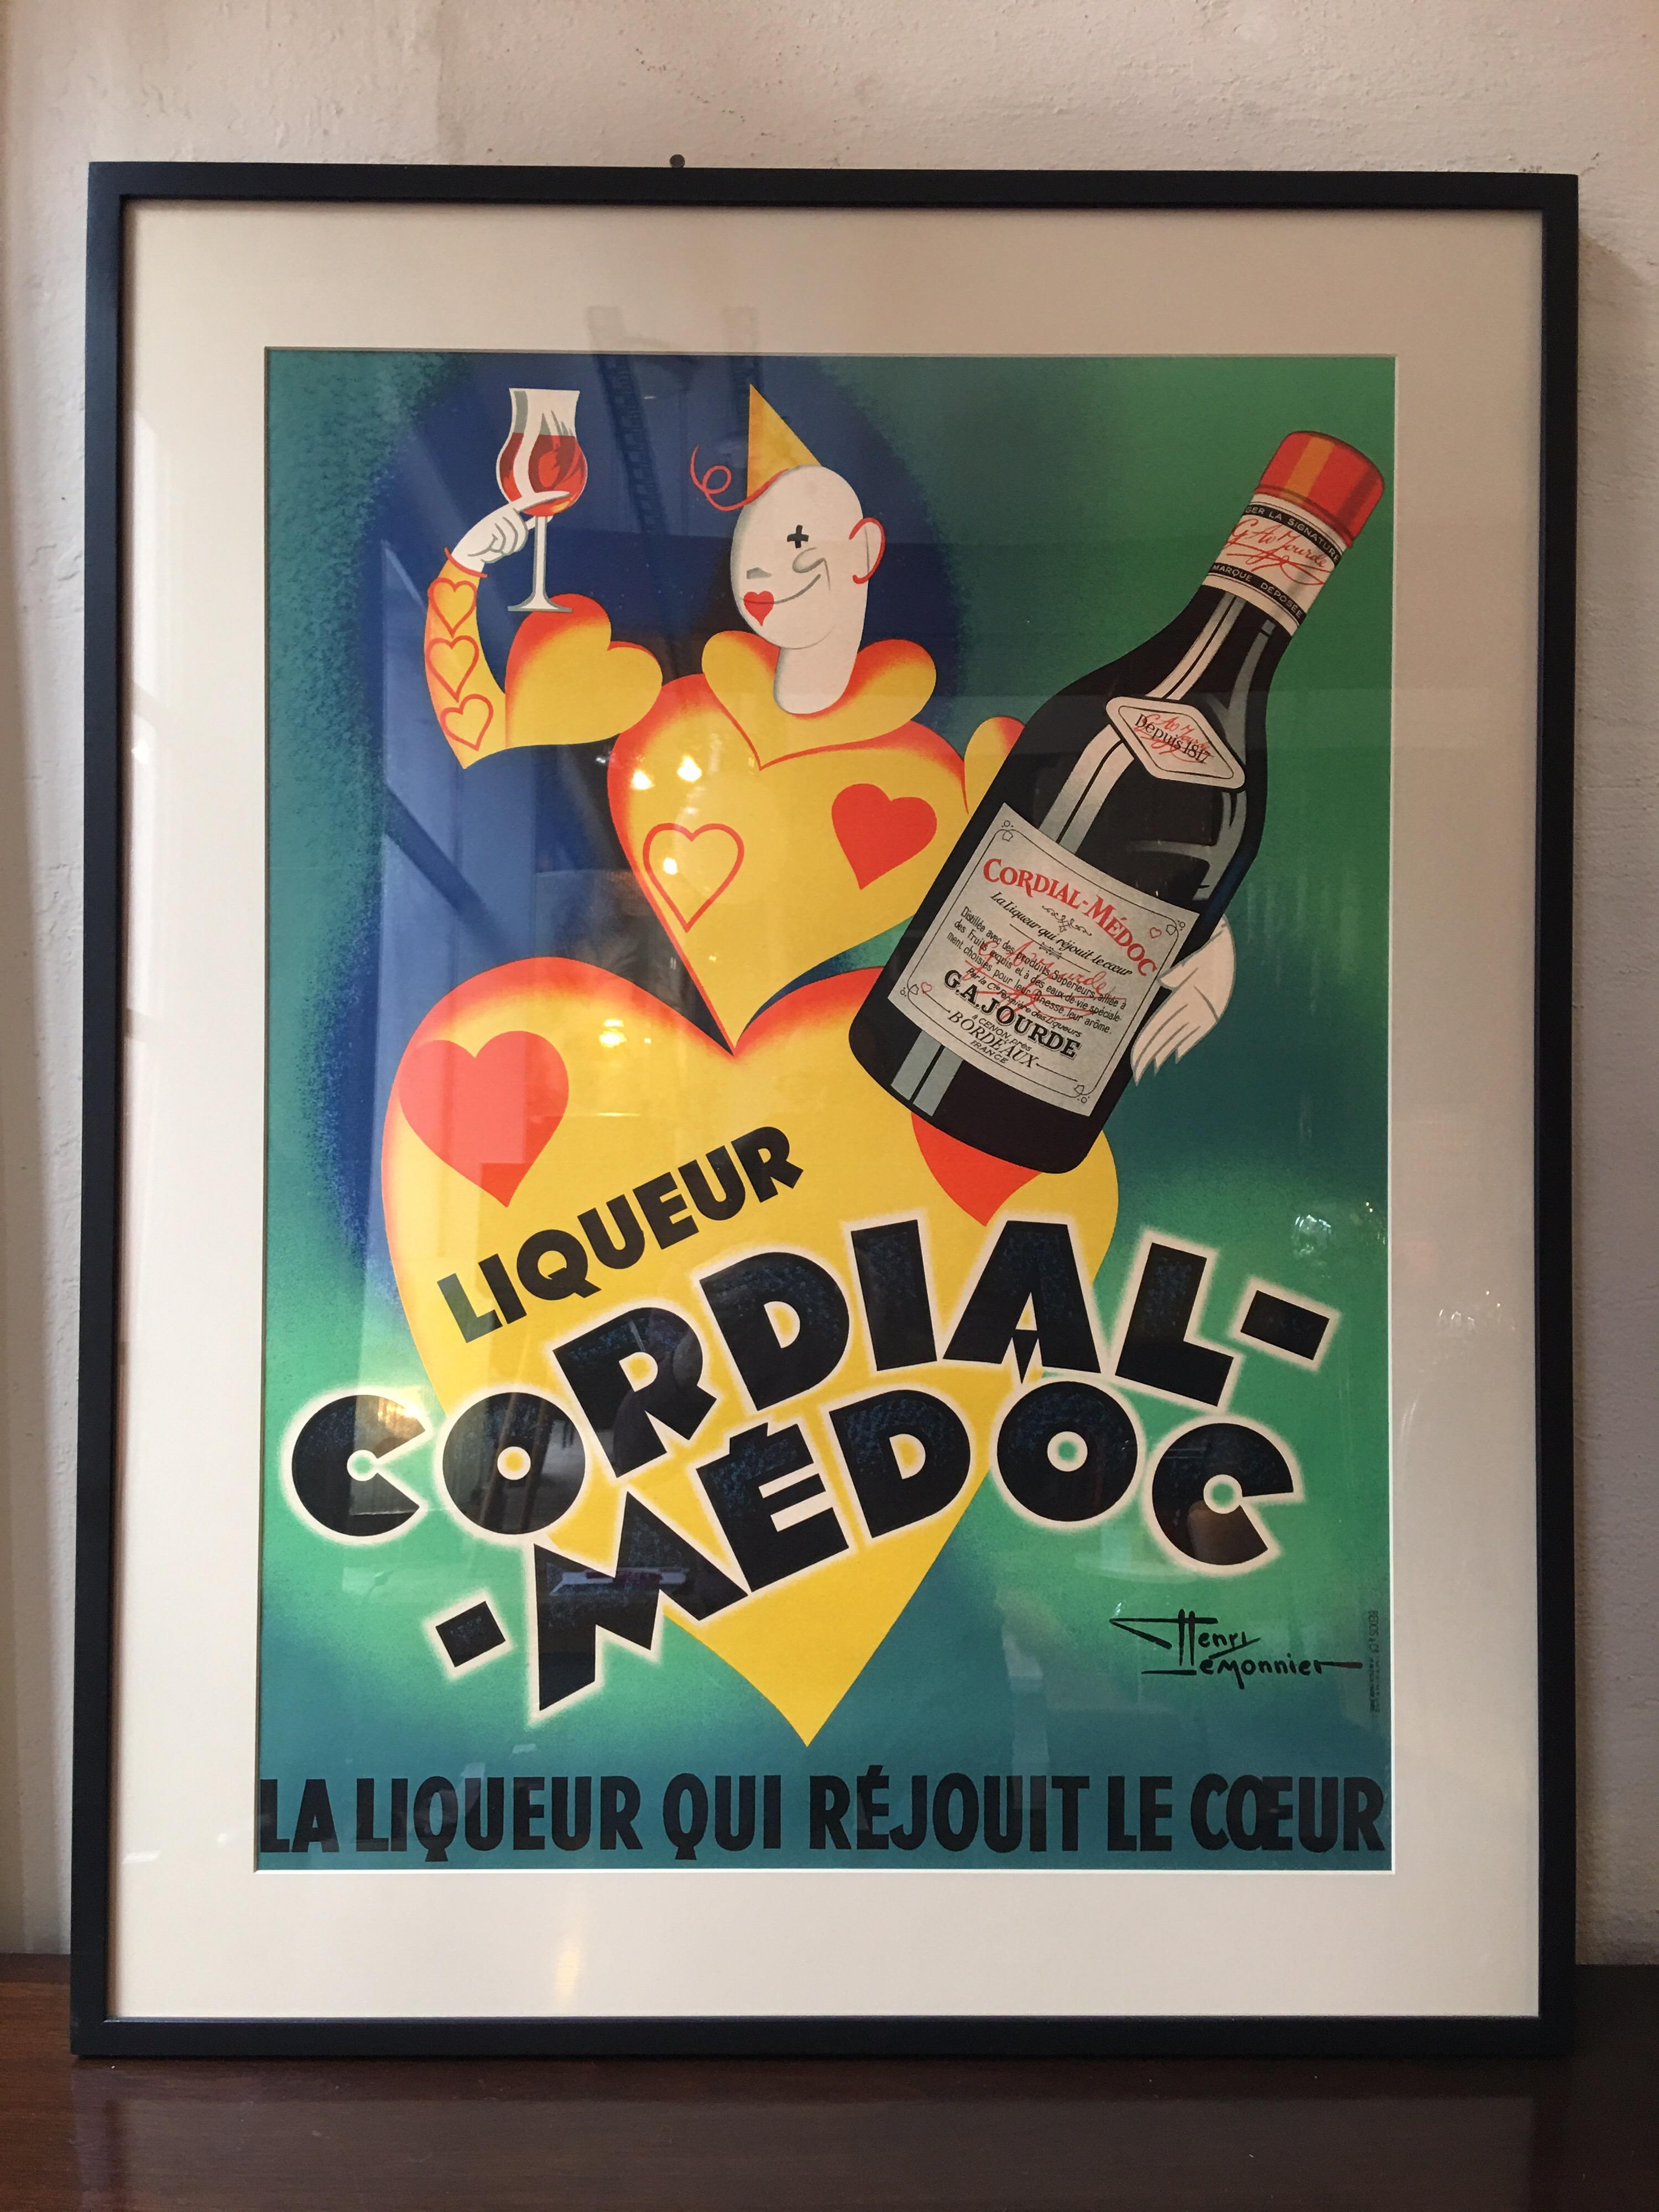 Liqueur Cordial-Medoc French poster. Vibrant colors, amazing condition! Professionally framed!